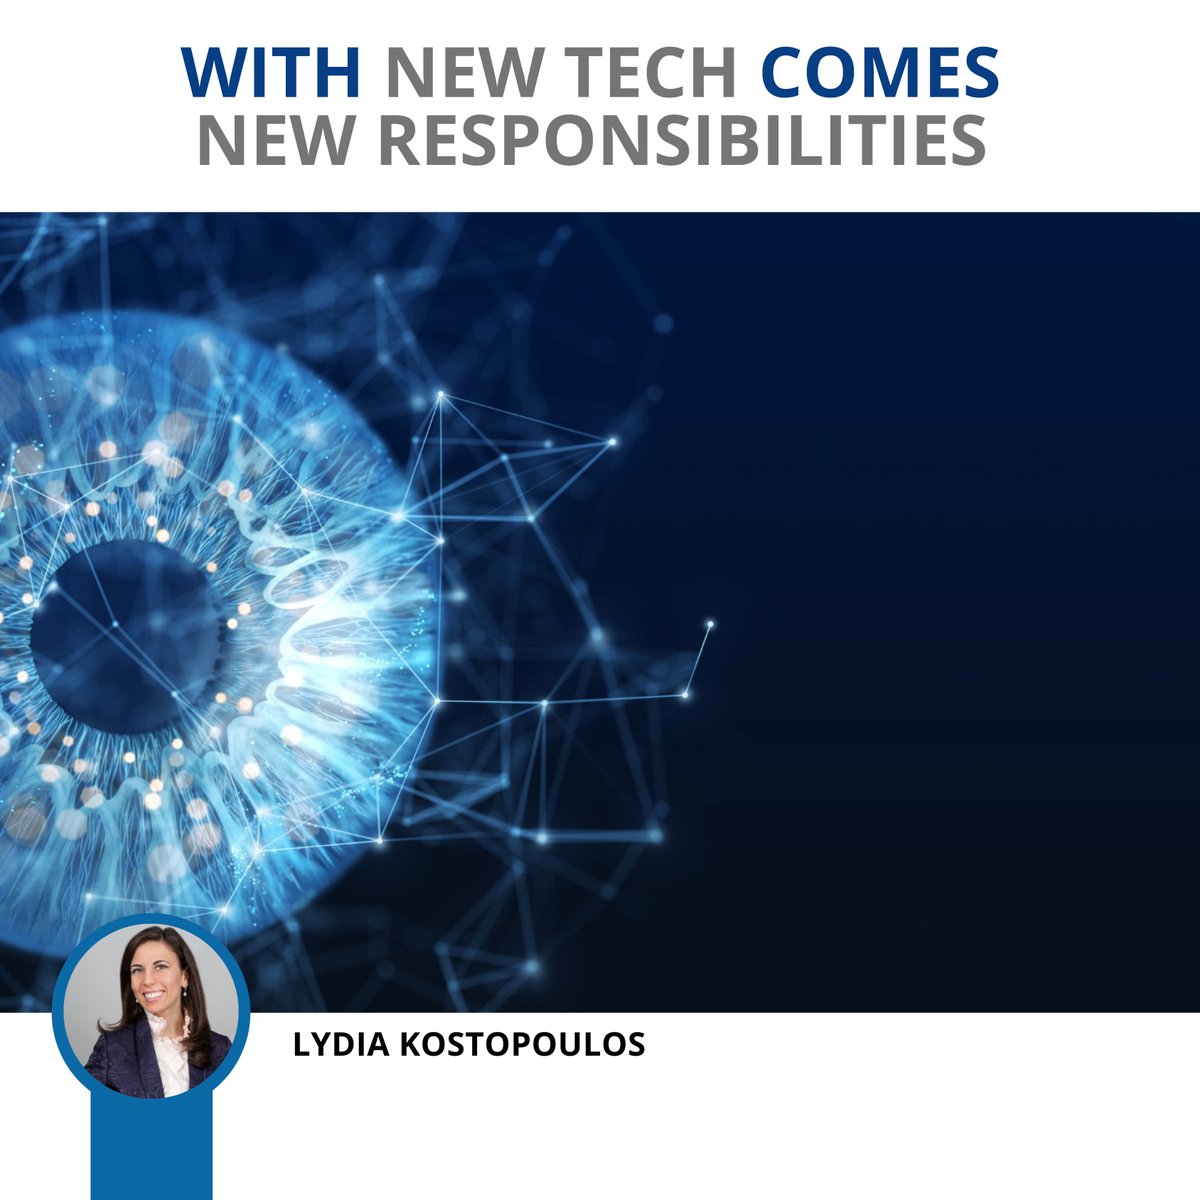 #AI builds on top of all previous #technologies—#Internet, mobile phones, the Internet of Things (IoT) & synthetic biology—and presents tremendous #economic & social opportunity, but also comes with the potential for immense social peril, notes @LKCyber 

shorturl.at/nqH28